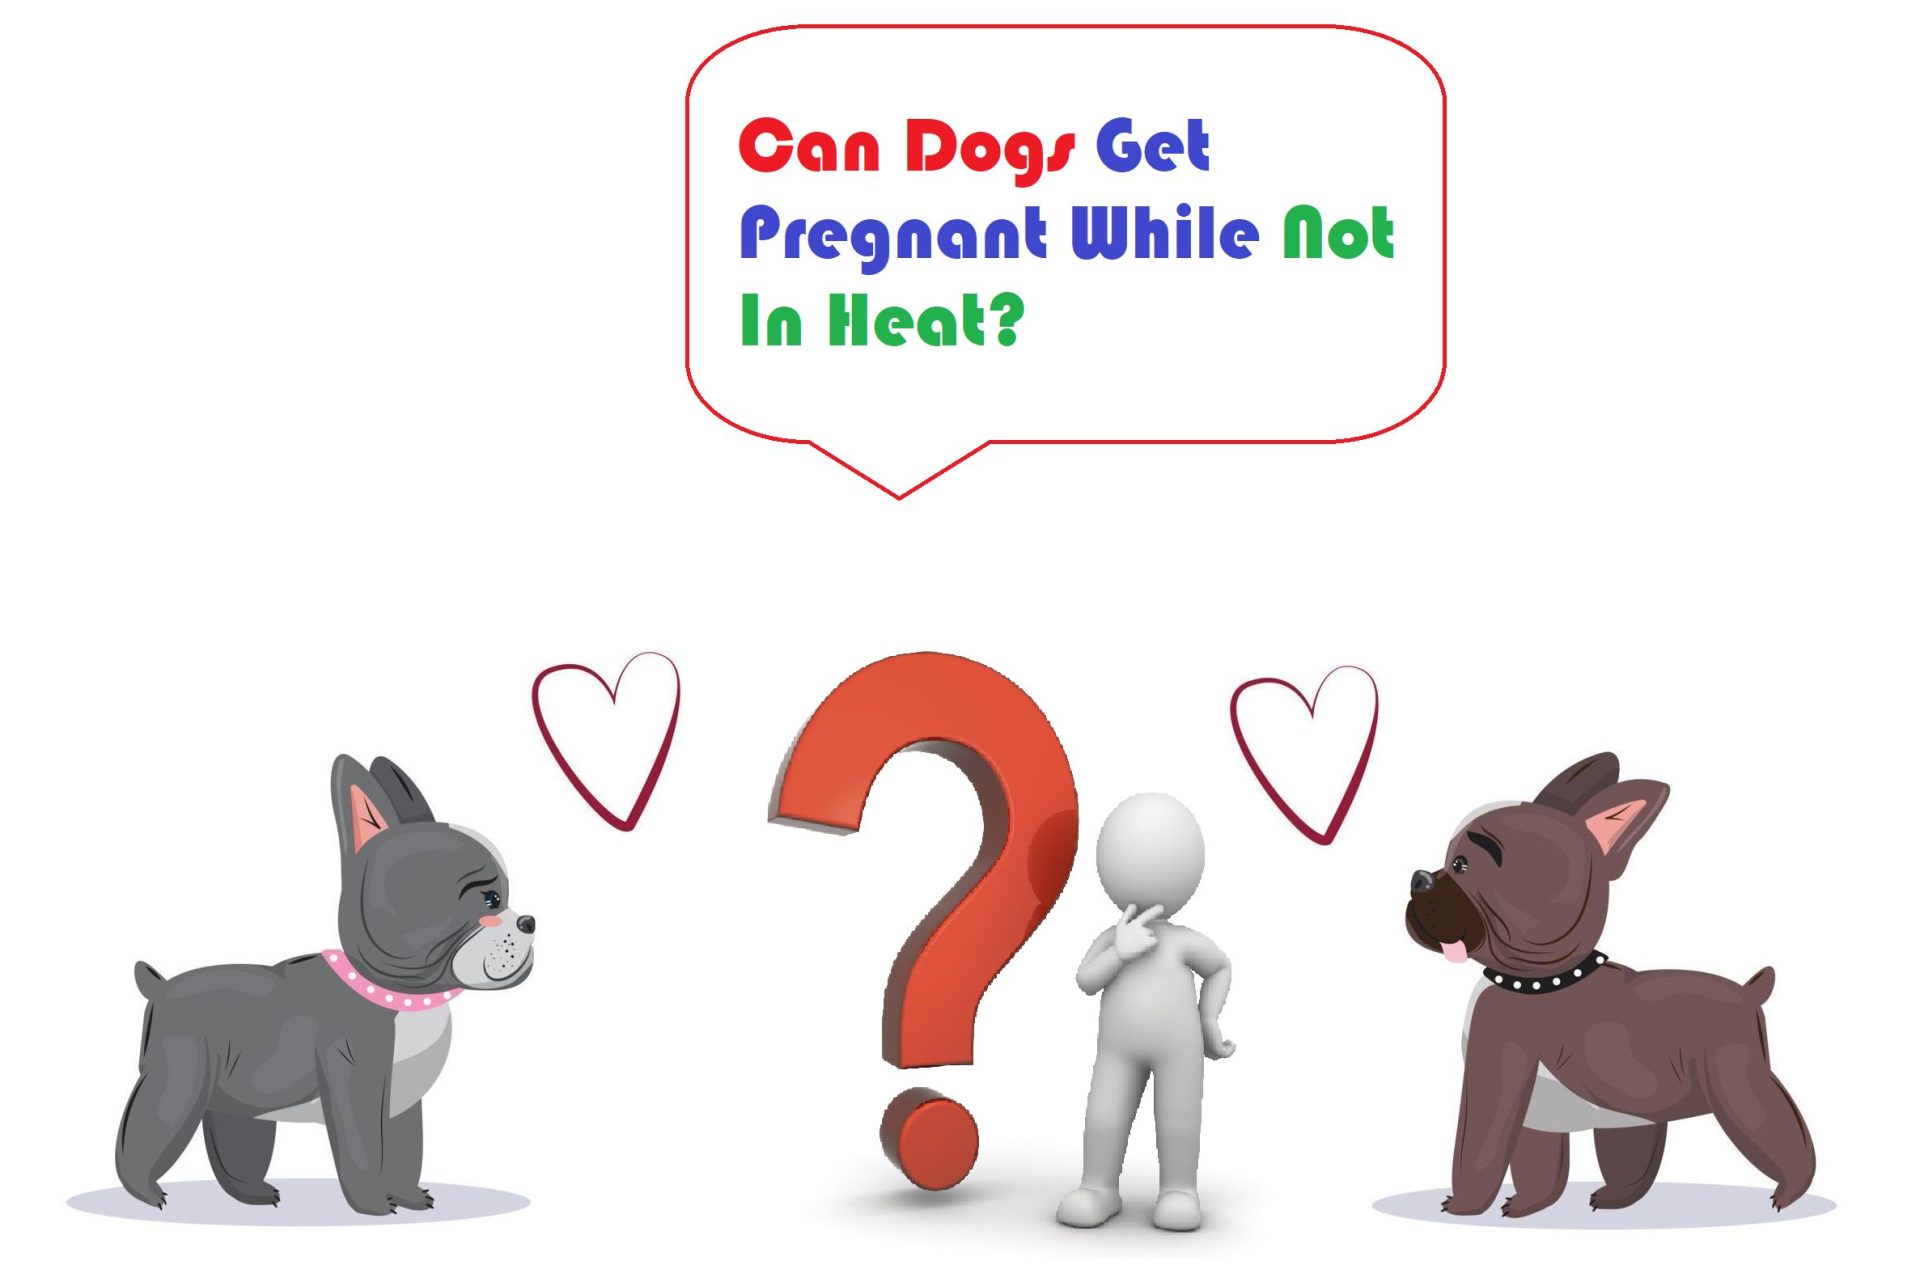 Can Dogs Get Pregnant When Not In Heat?